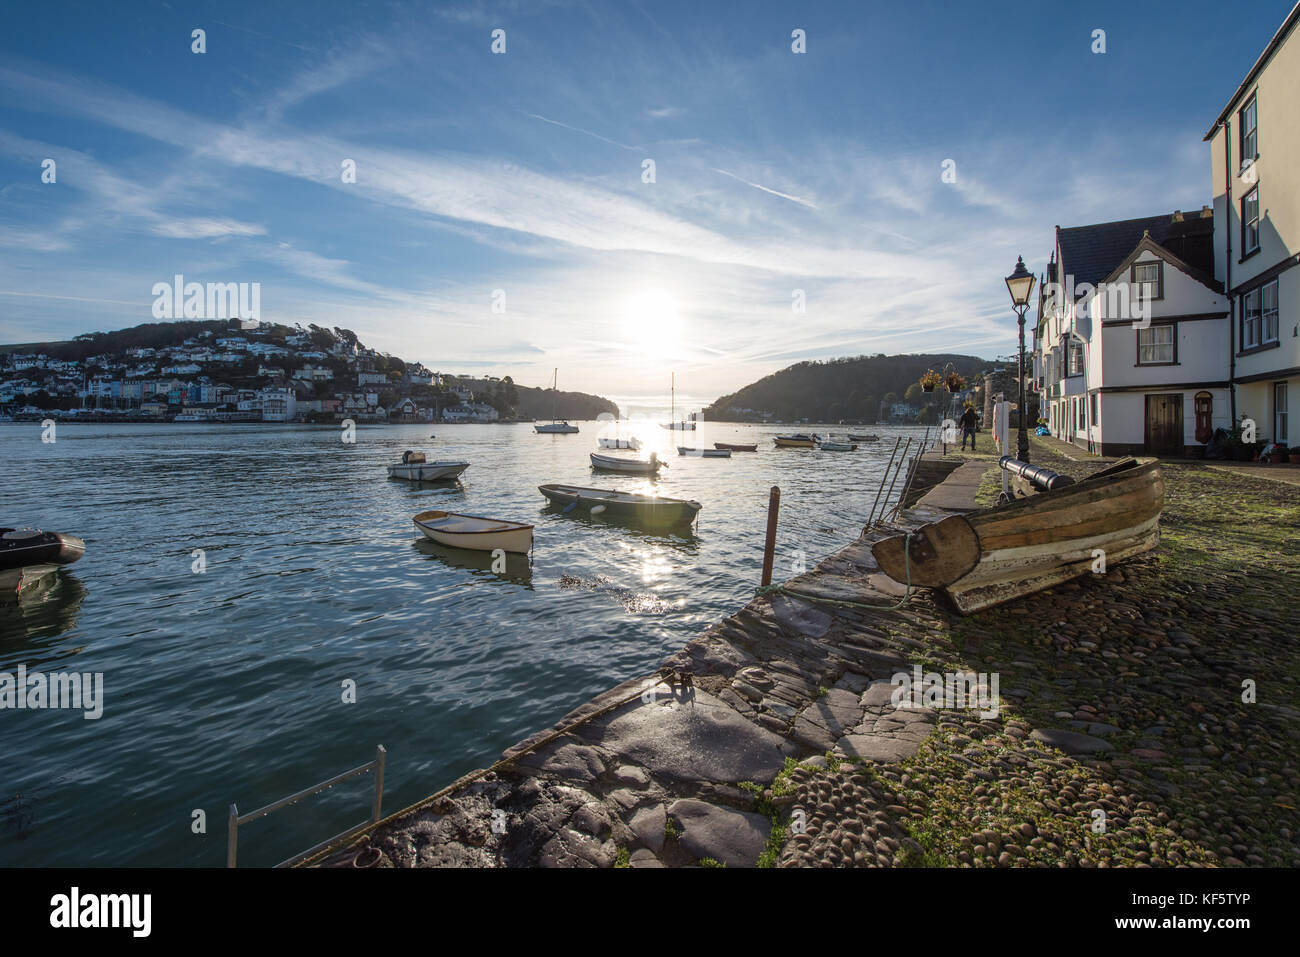 Beautiful early morning shot of Dartmouth fro Bayards Cove with a wooden boat on the quayside, and boats floating on the water with the sun rising Stock Photo